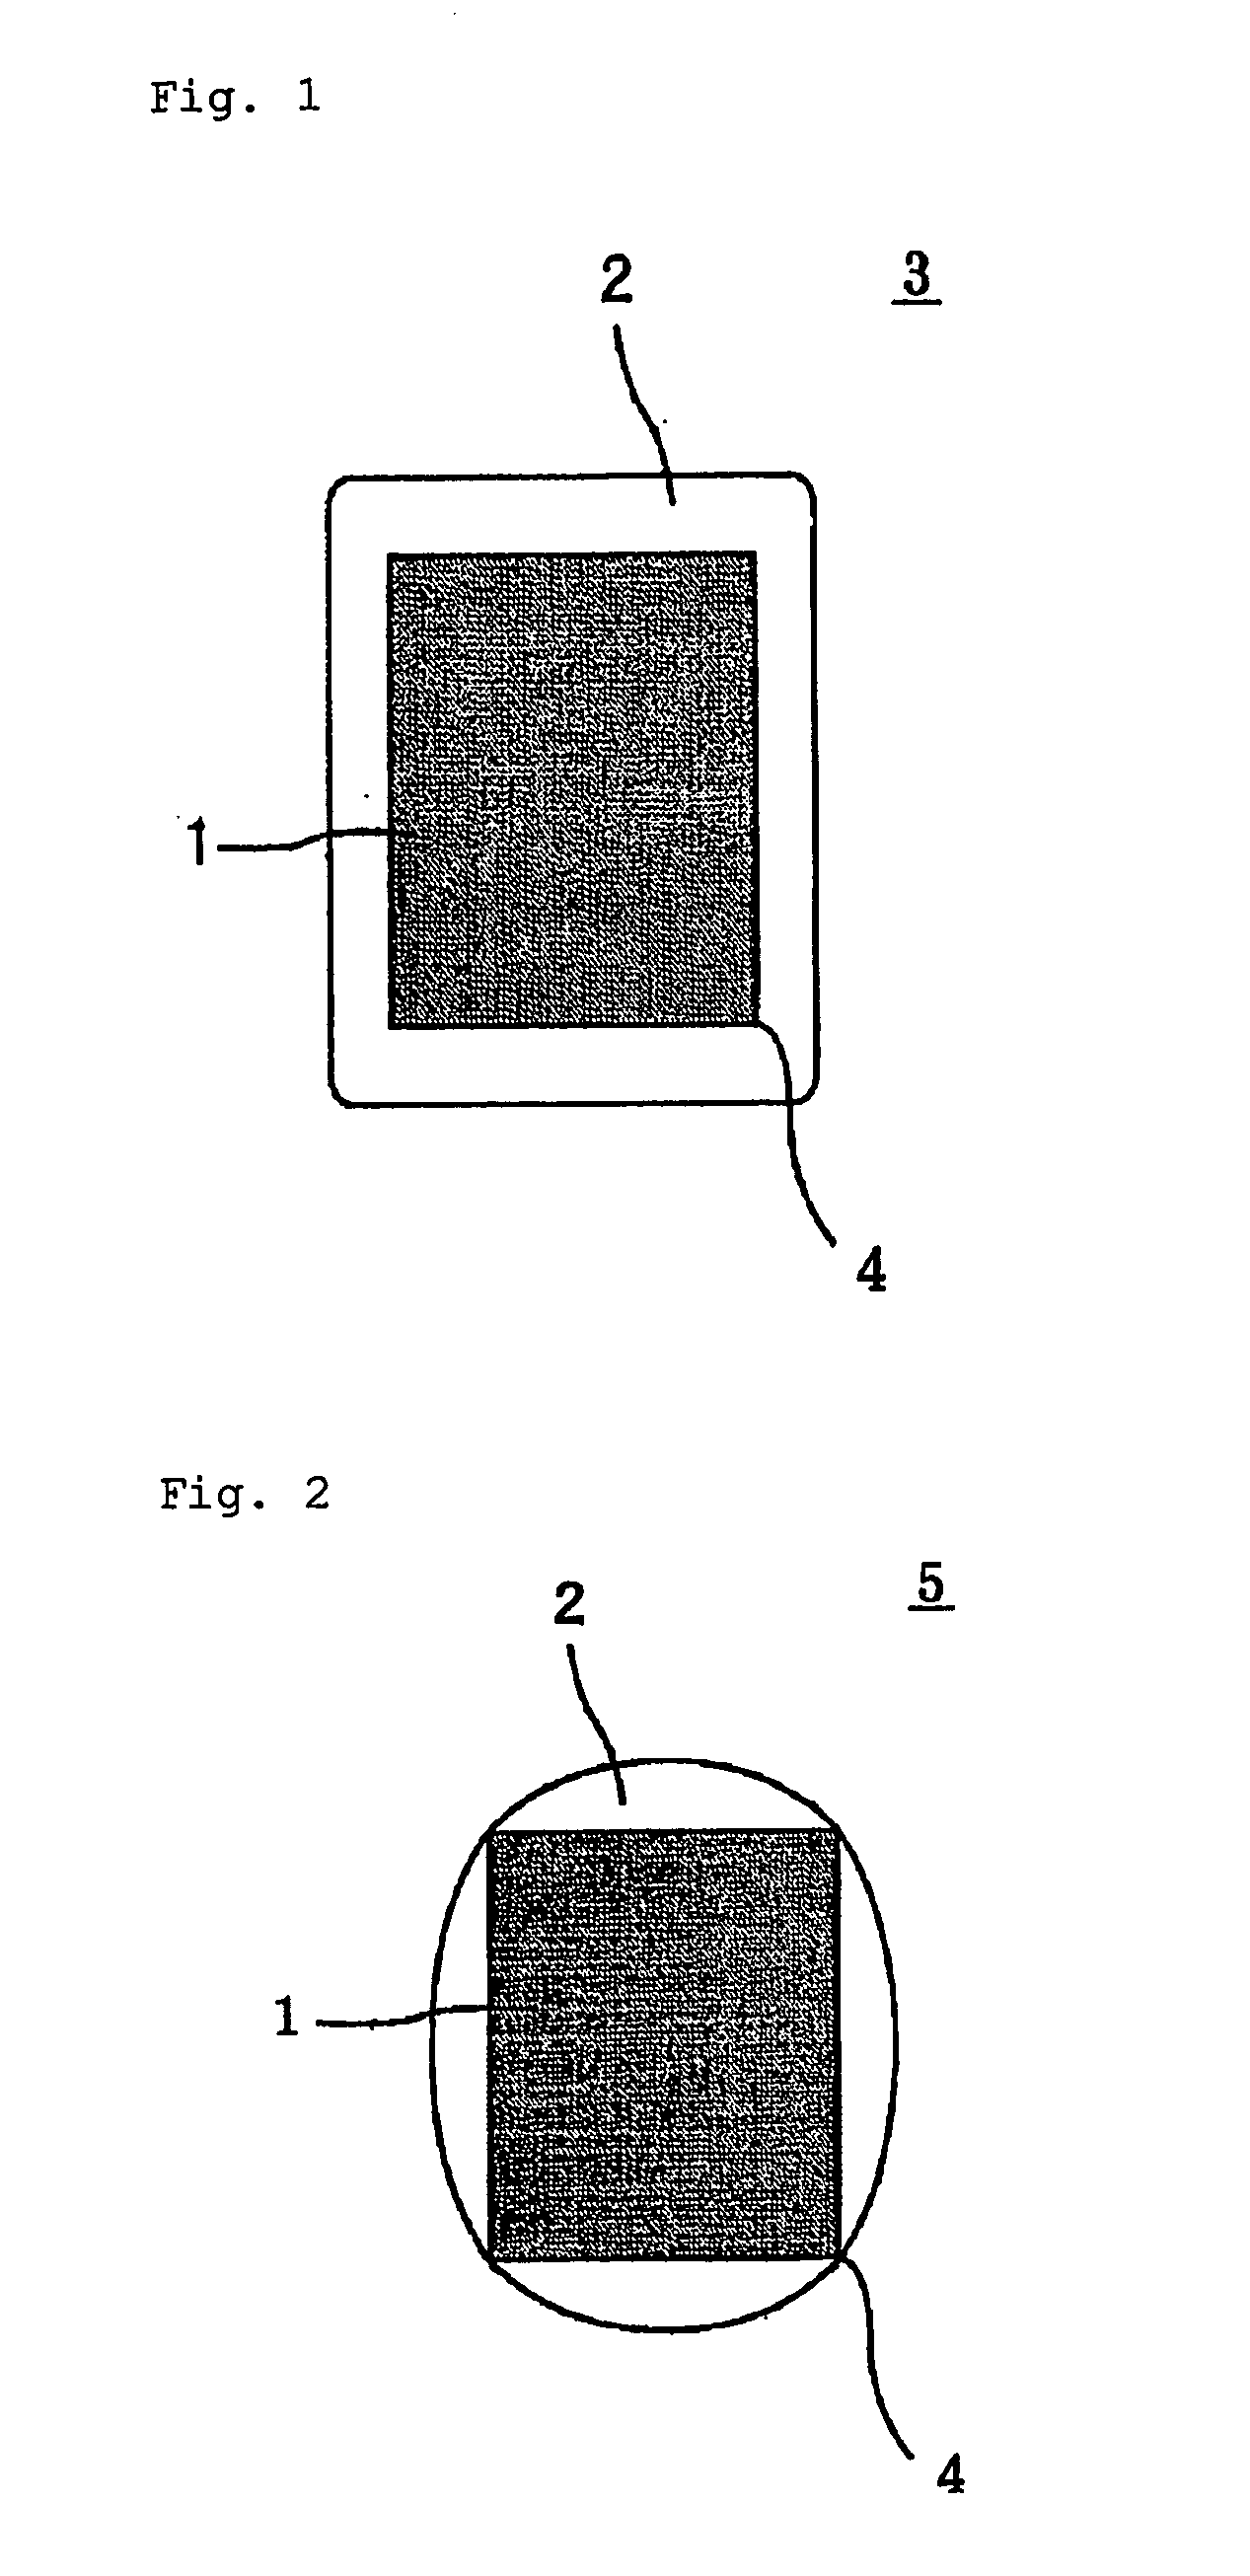 Method of coating electric wire having edges and insulated wire